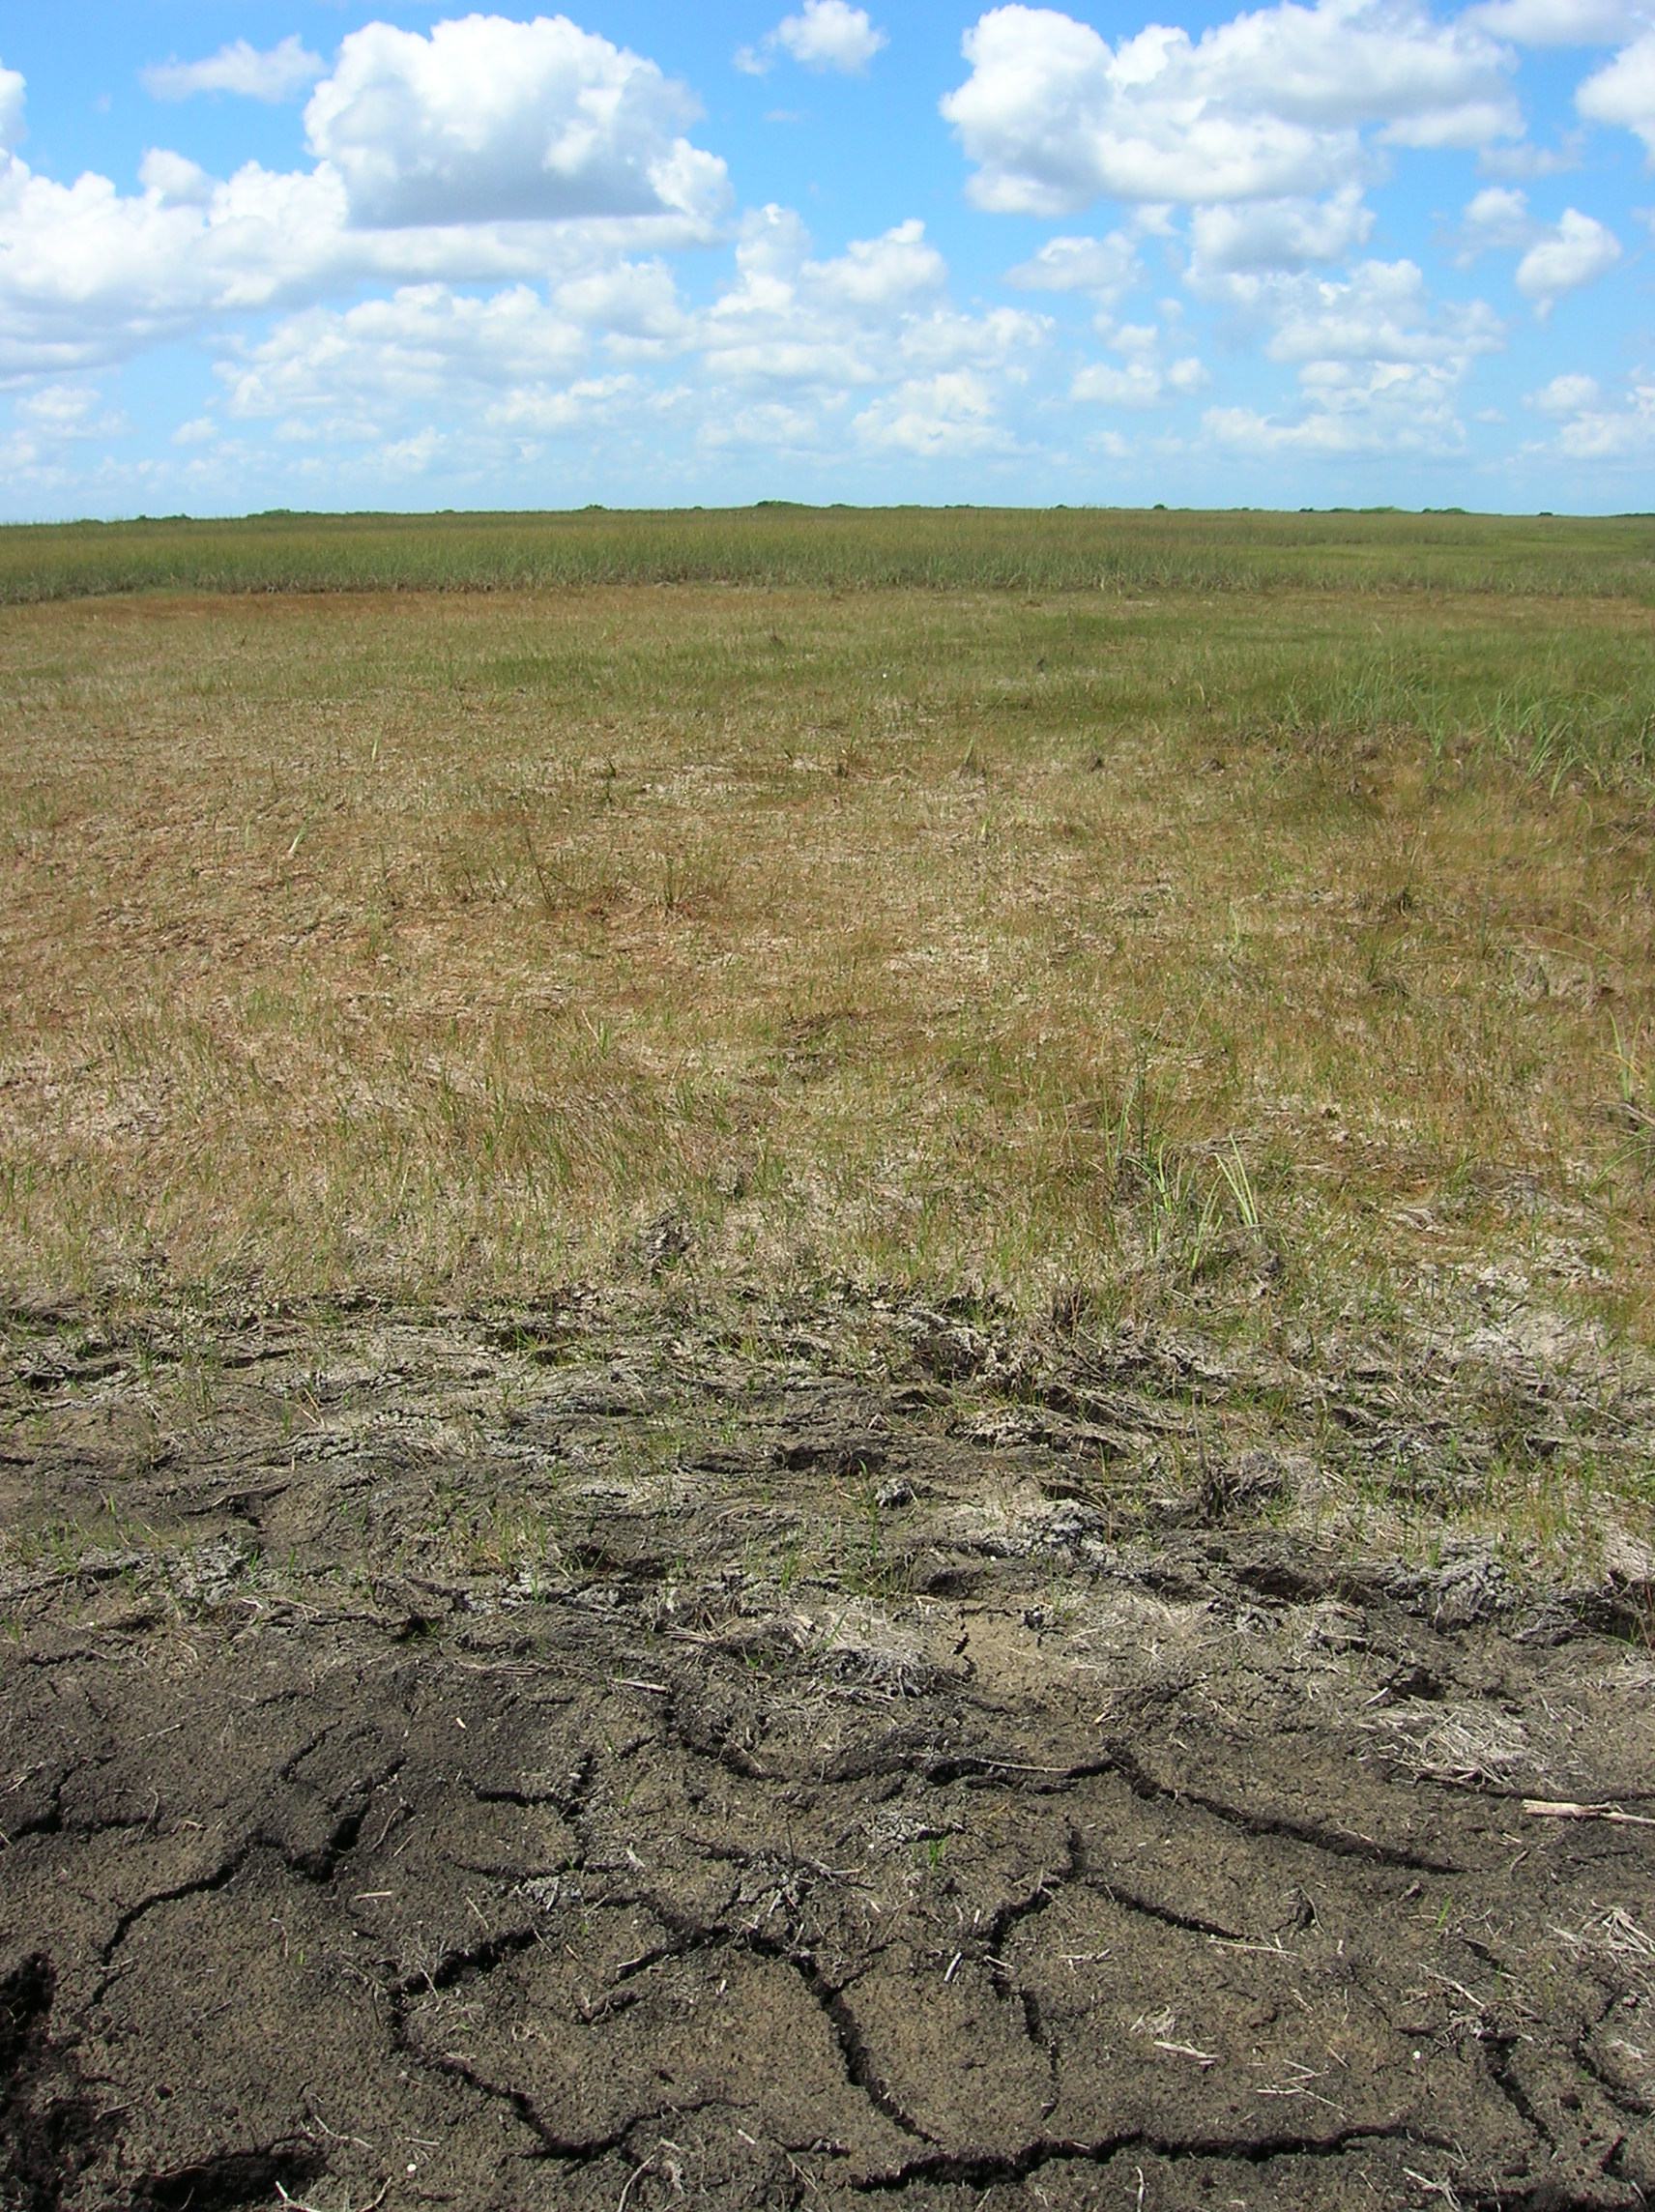 Long-hydroperiod Everglades marsh under extremely dry conditions, late dry season, 2009 (near SRS-2 in Shark River Slough)